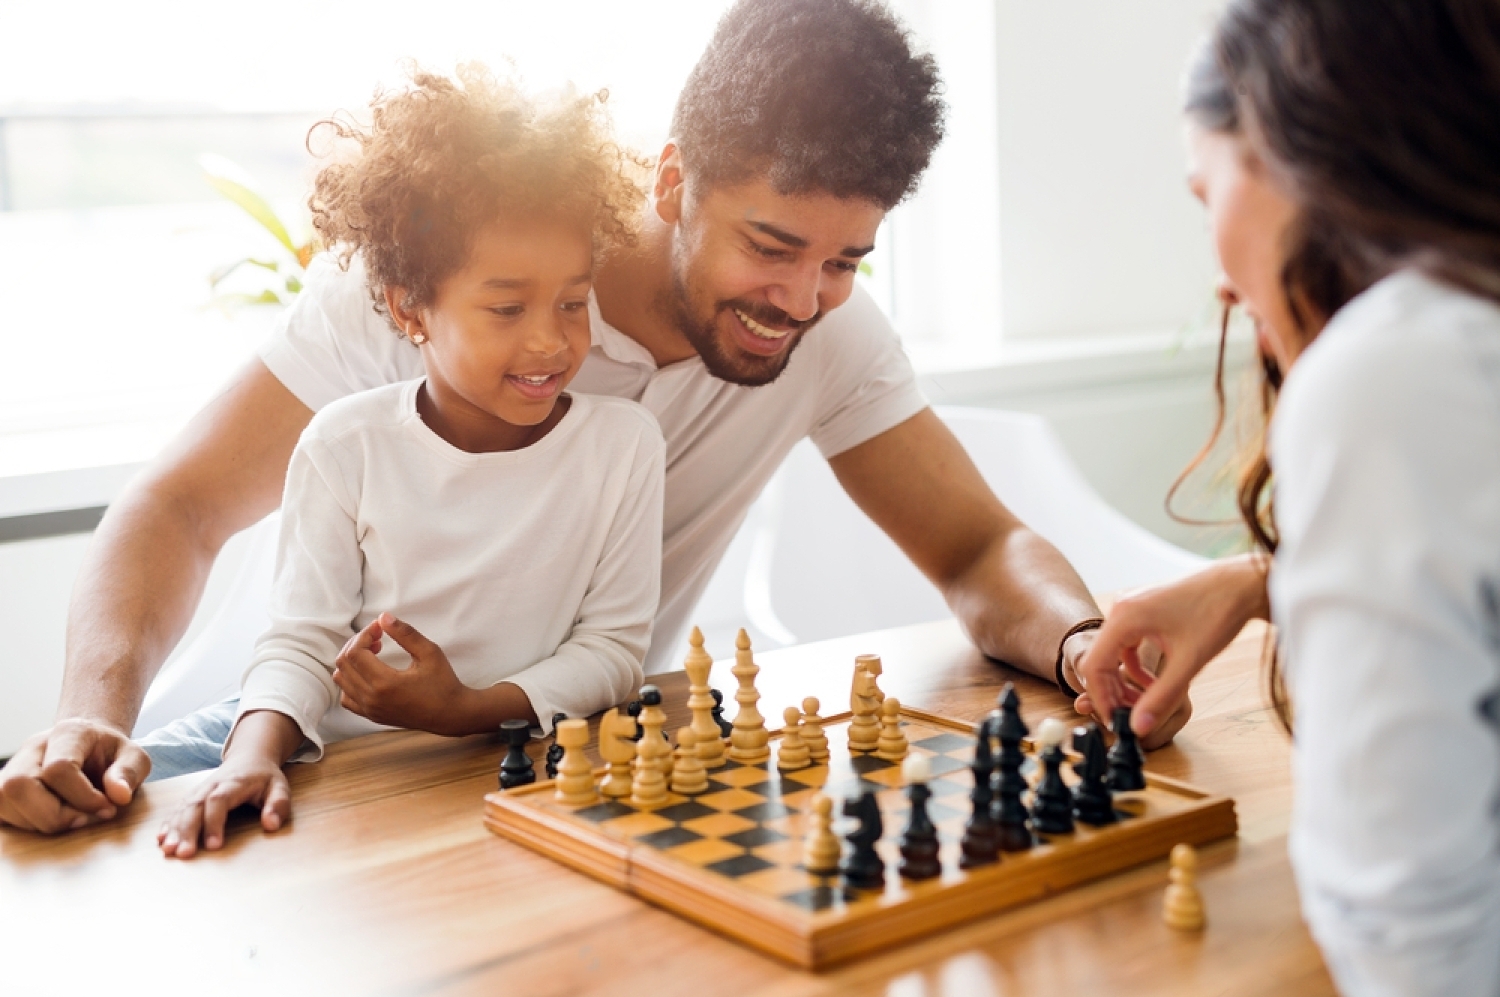 stock-photo-happy-family-playing-chess-together-788454118-iFOm6iwPu-transformed (2)